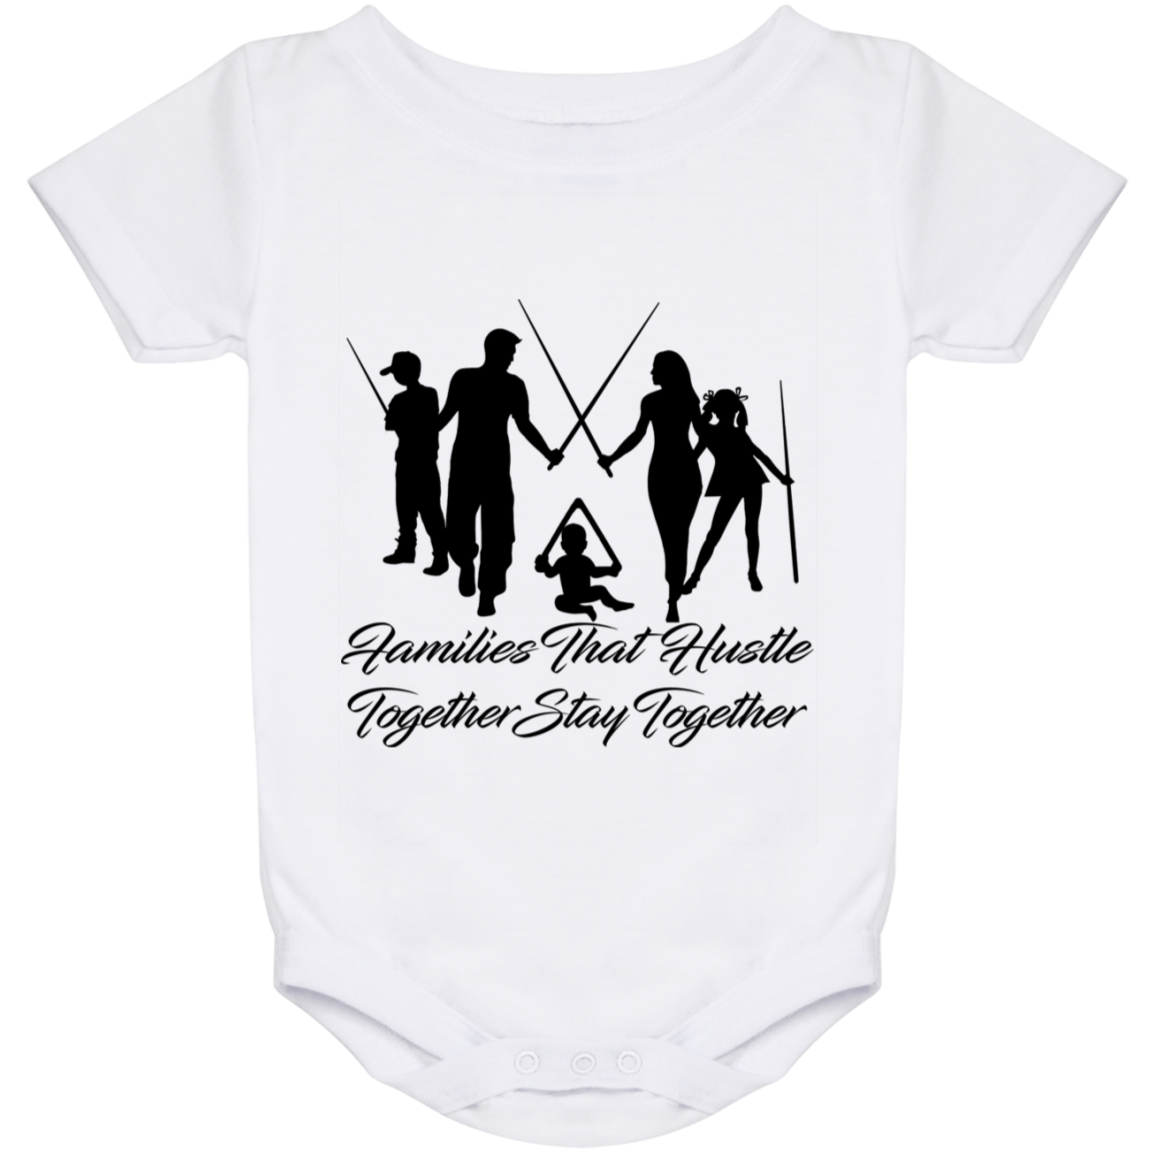 The GHOATS Custom Design. #11 Families That Hustle Together, Stay Together. Baby Onesie 24 Month